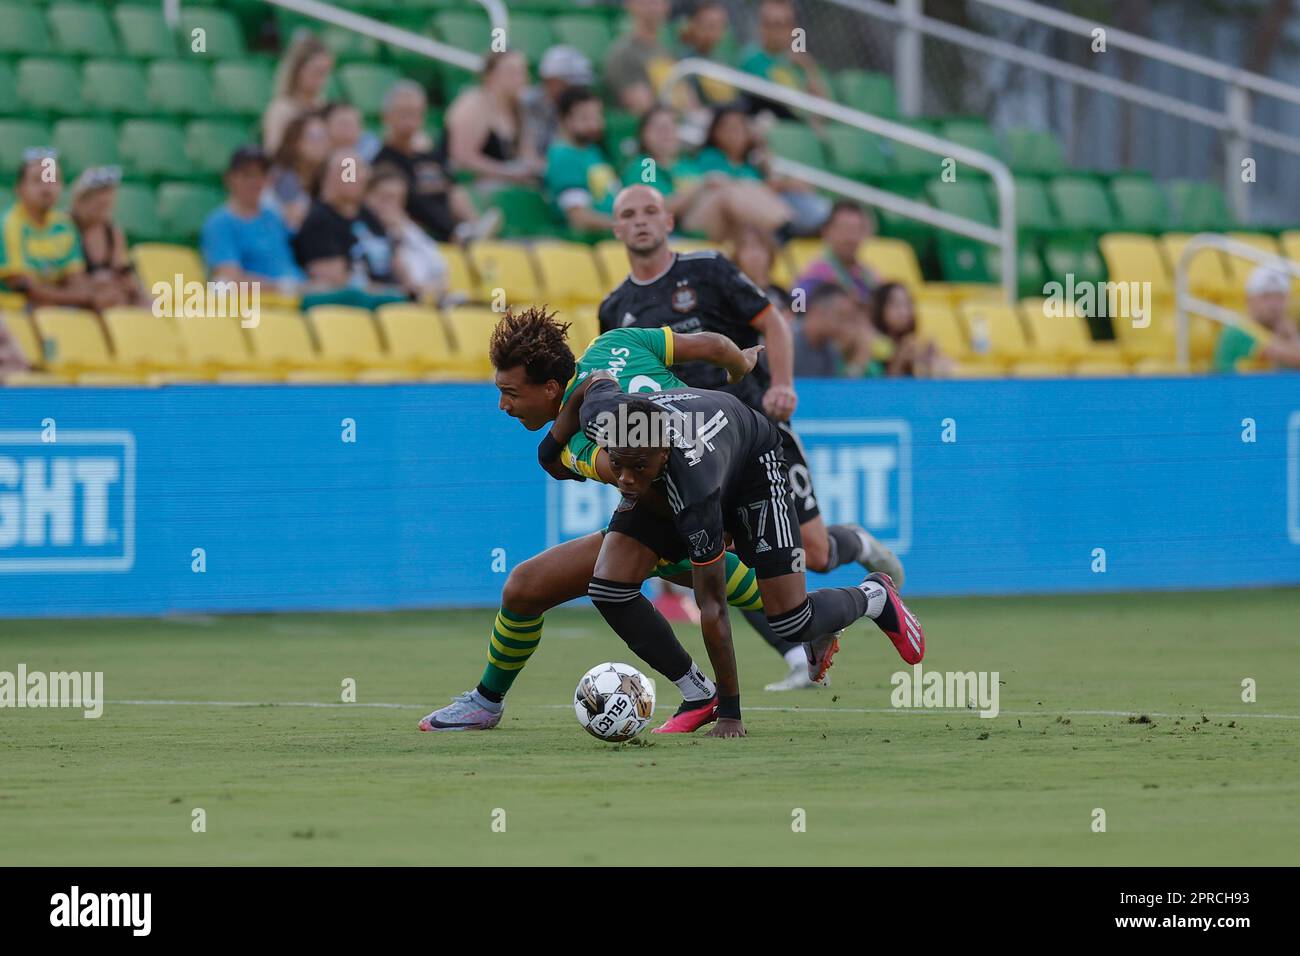 St. Petersburg, FL: Tampa Bay Rowdies forward JJ Williams (9) and Houston Dynamo defender Teenage Hadebe (17) fight for possession of the ball during Stock Photo